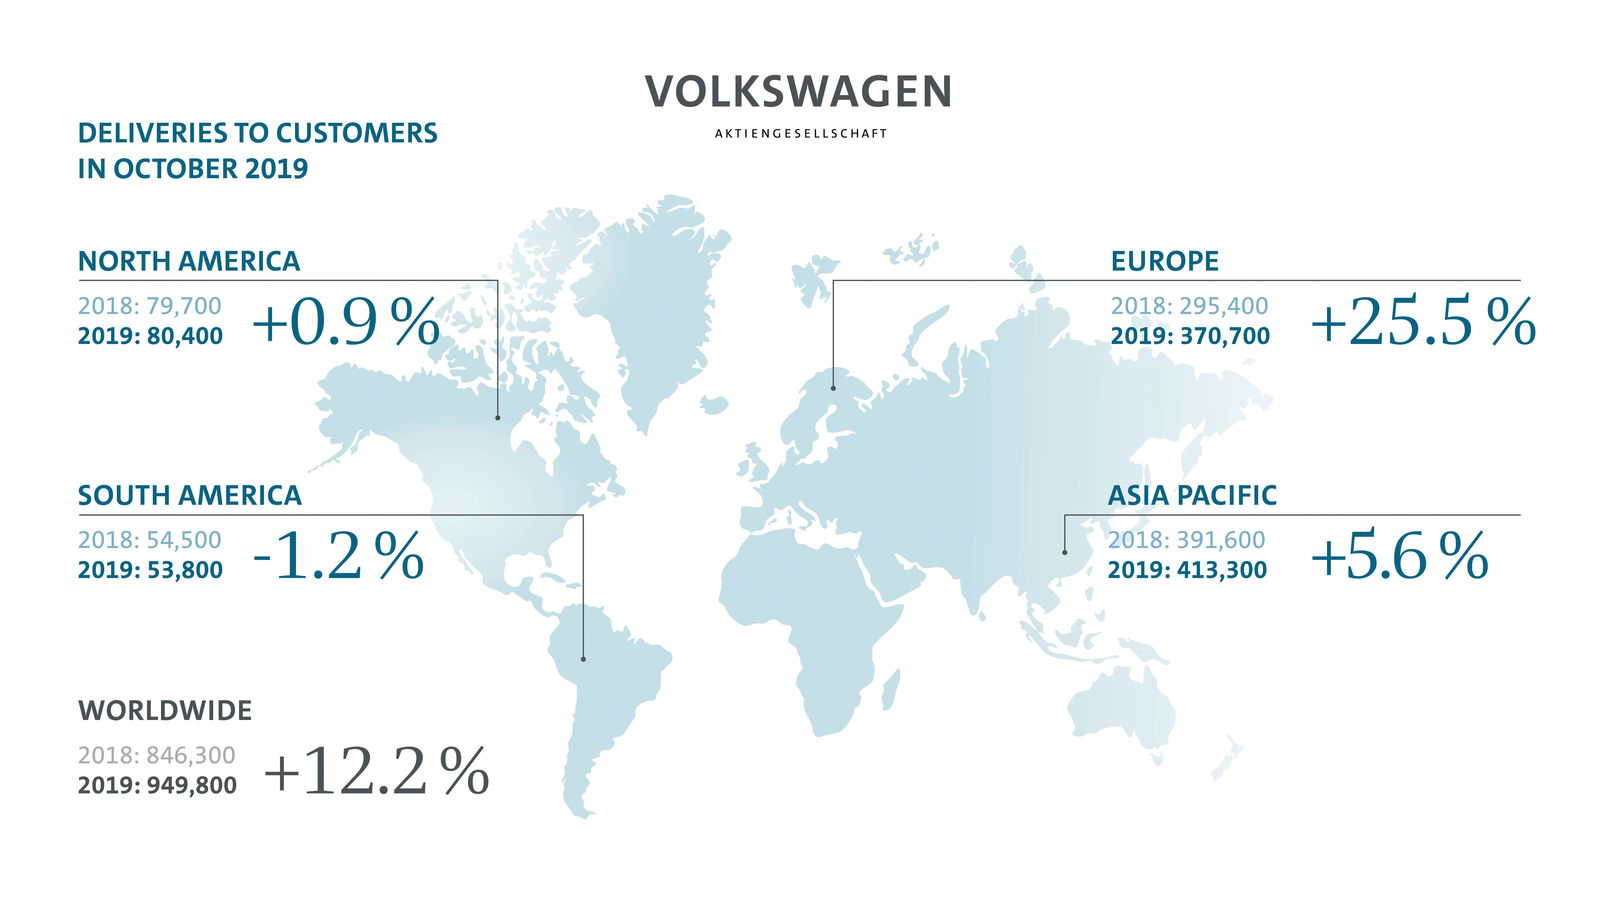 Strong deliveries for Volkswagen Group in October